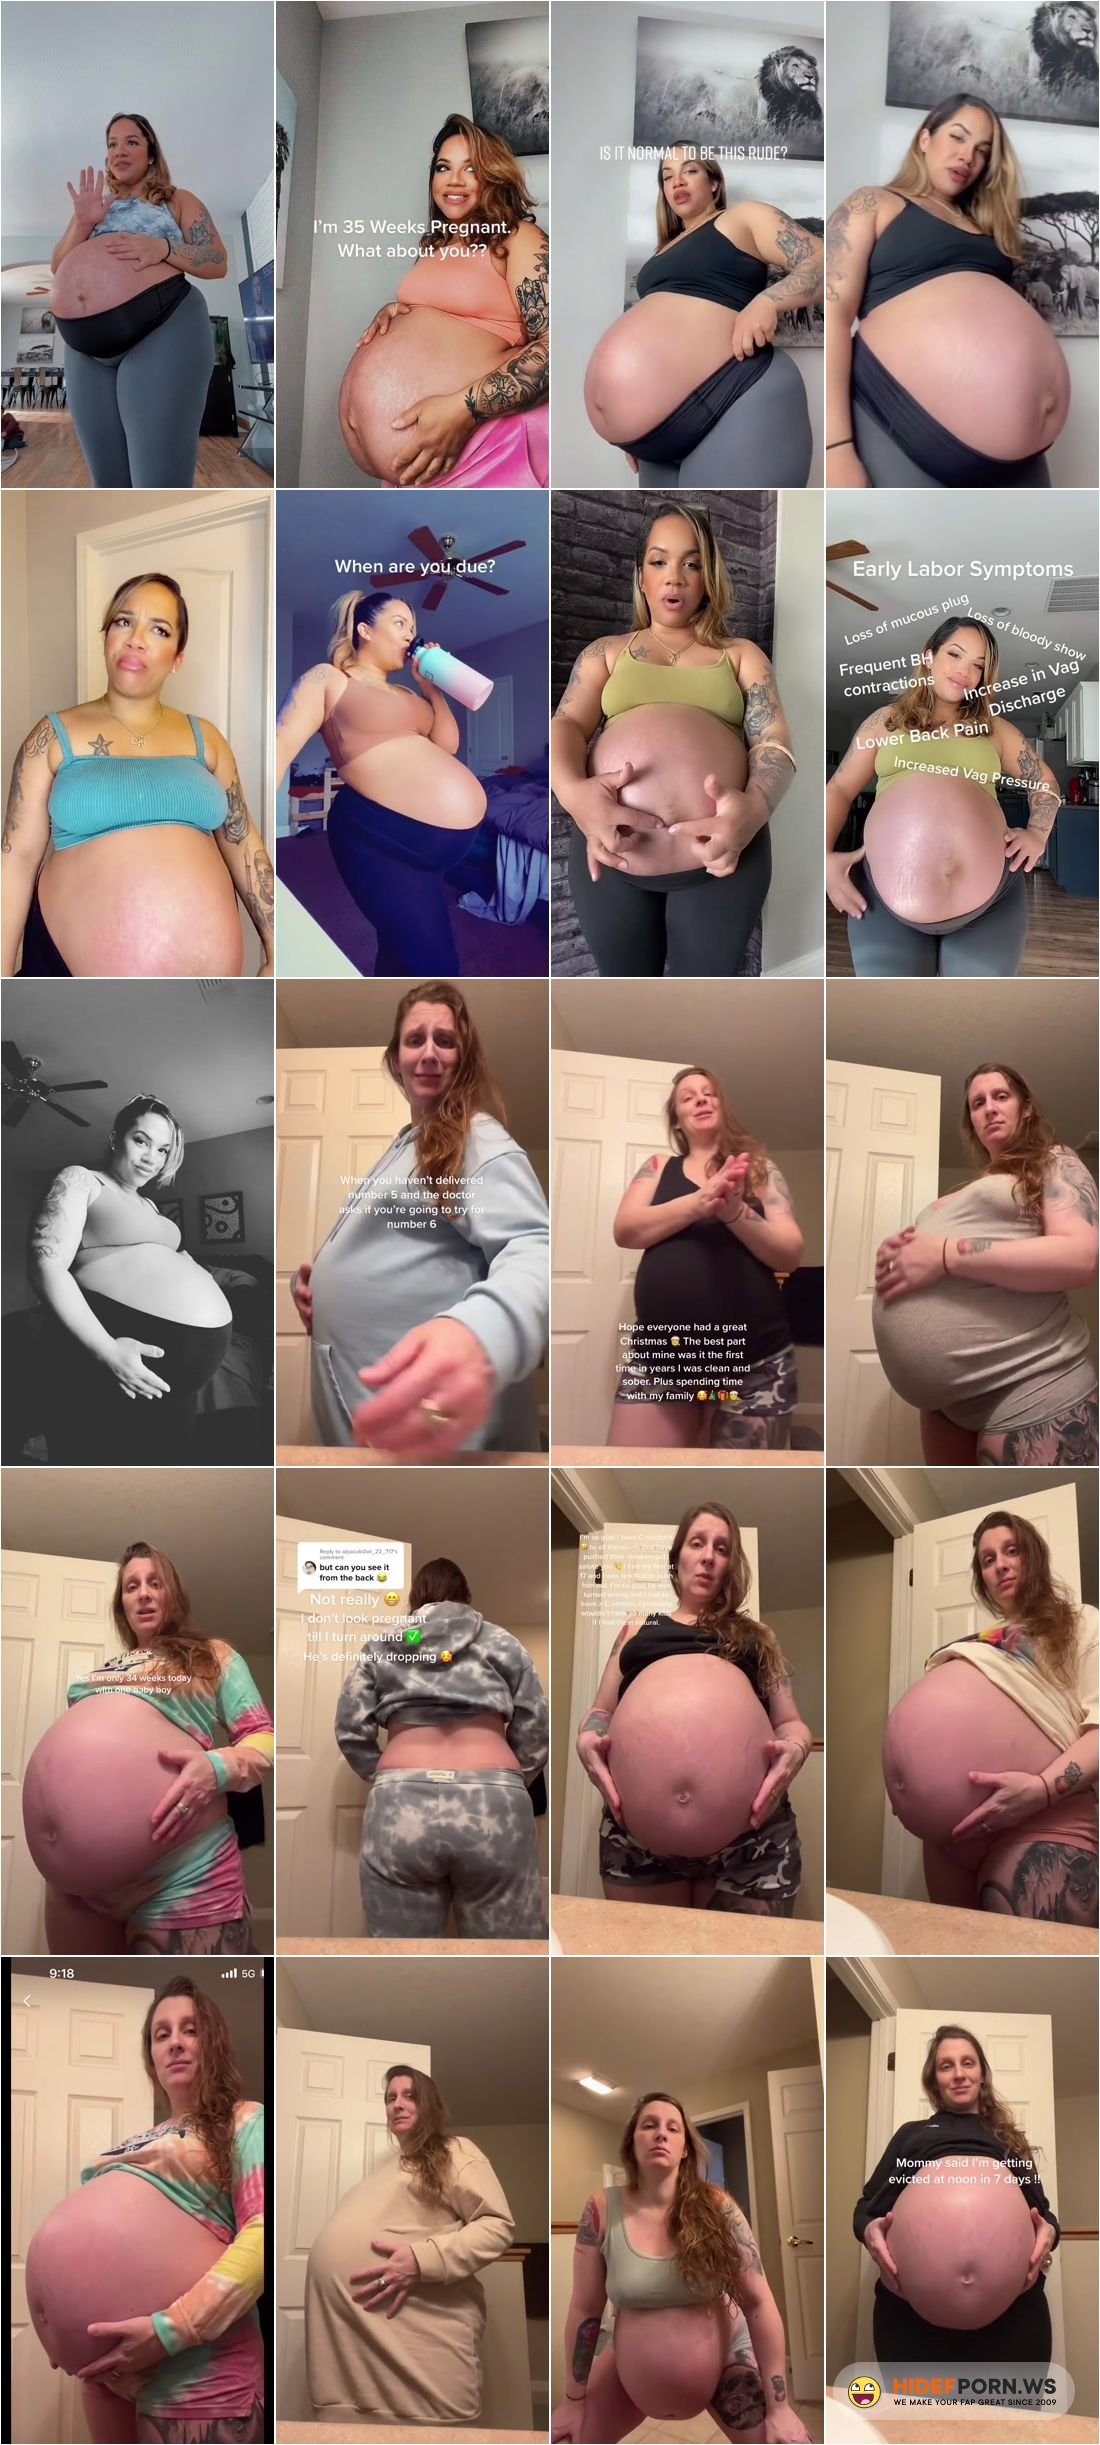 Preggo Compilation - Pregnant Compilation - Brookesobasic and Renae W - NN Monster Bump Pregnant  Compilation HD 1024p Â» HiDefPorn.ws